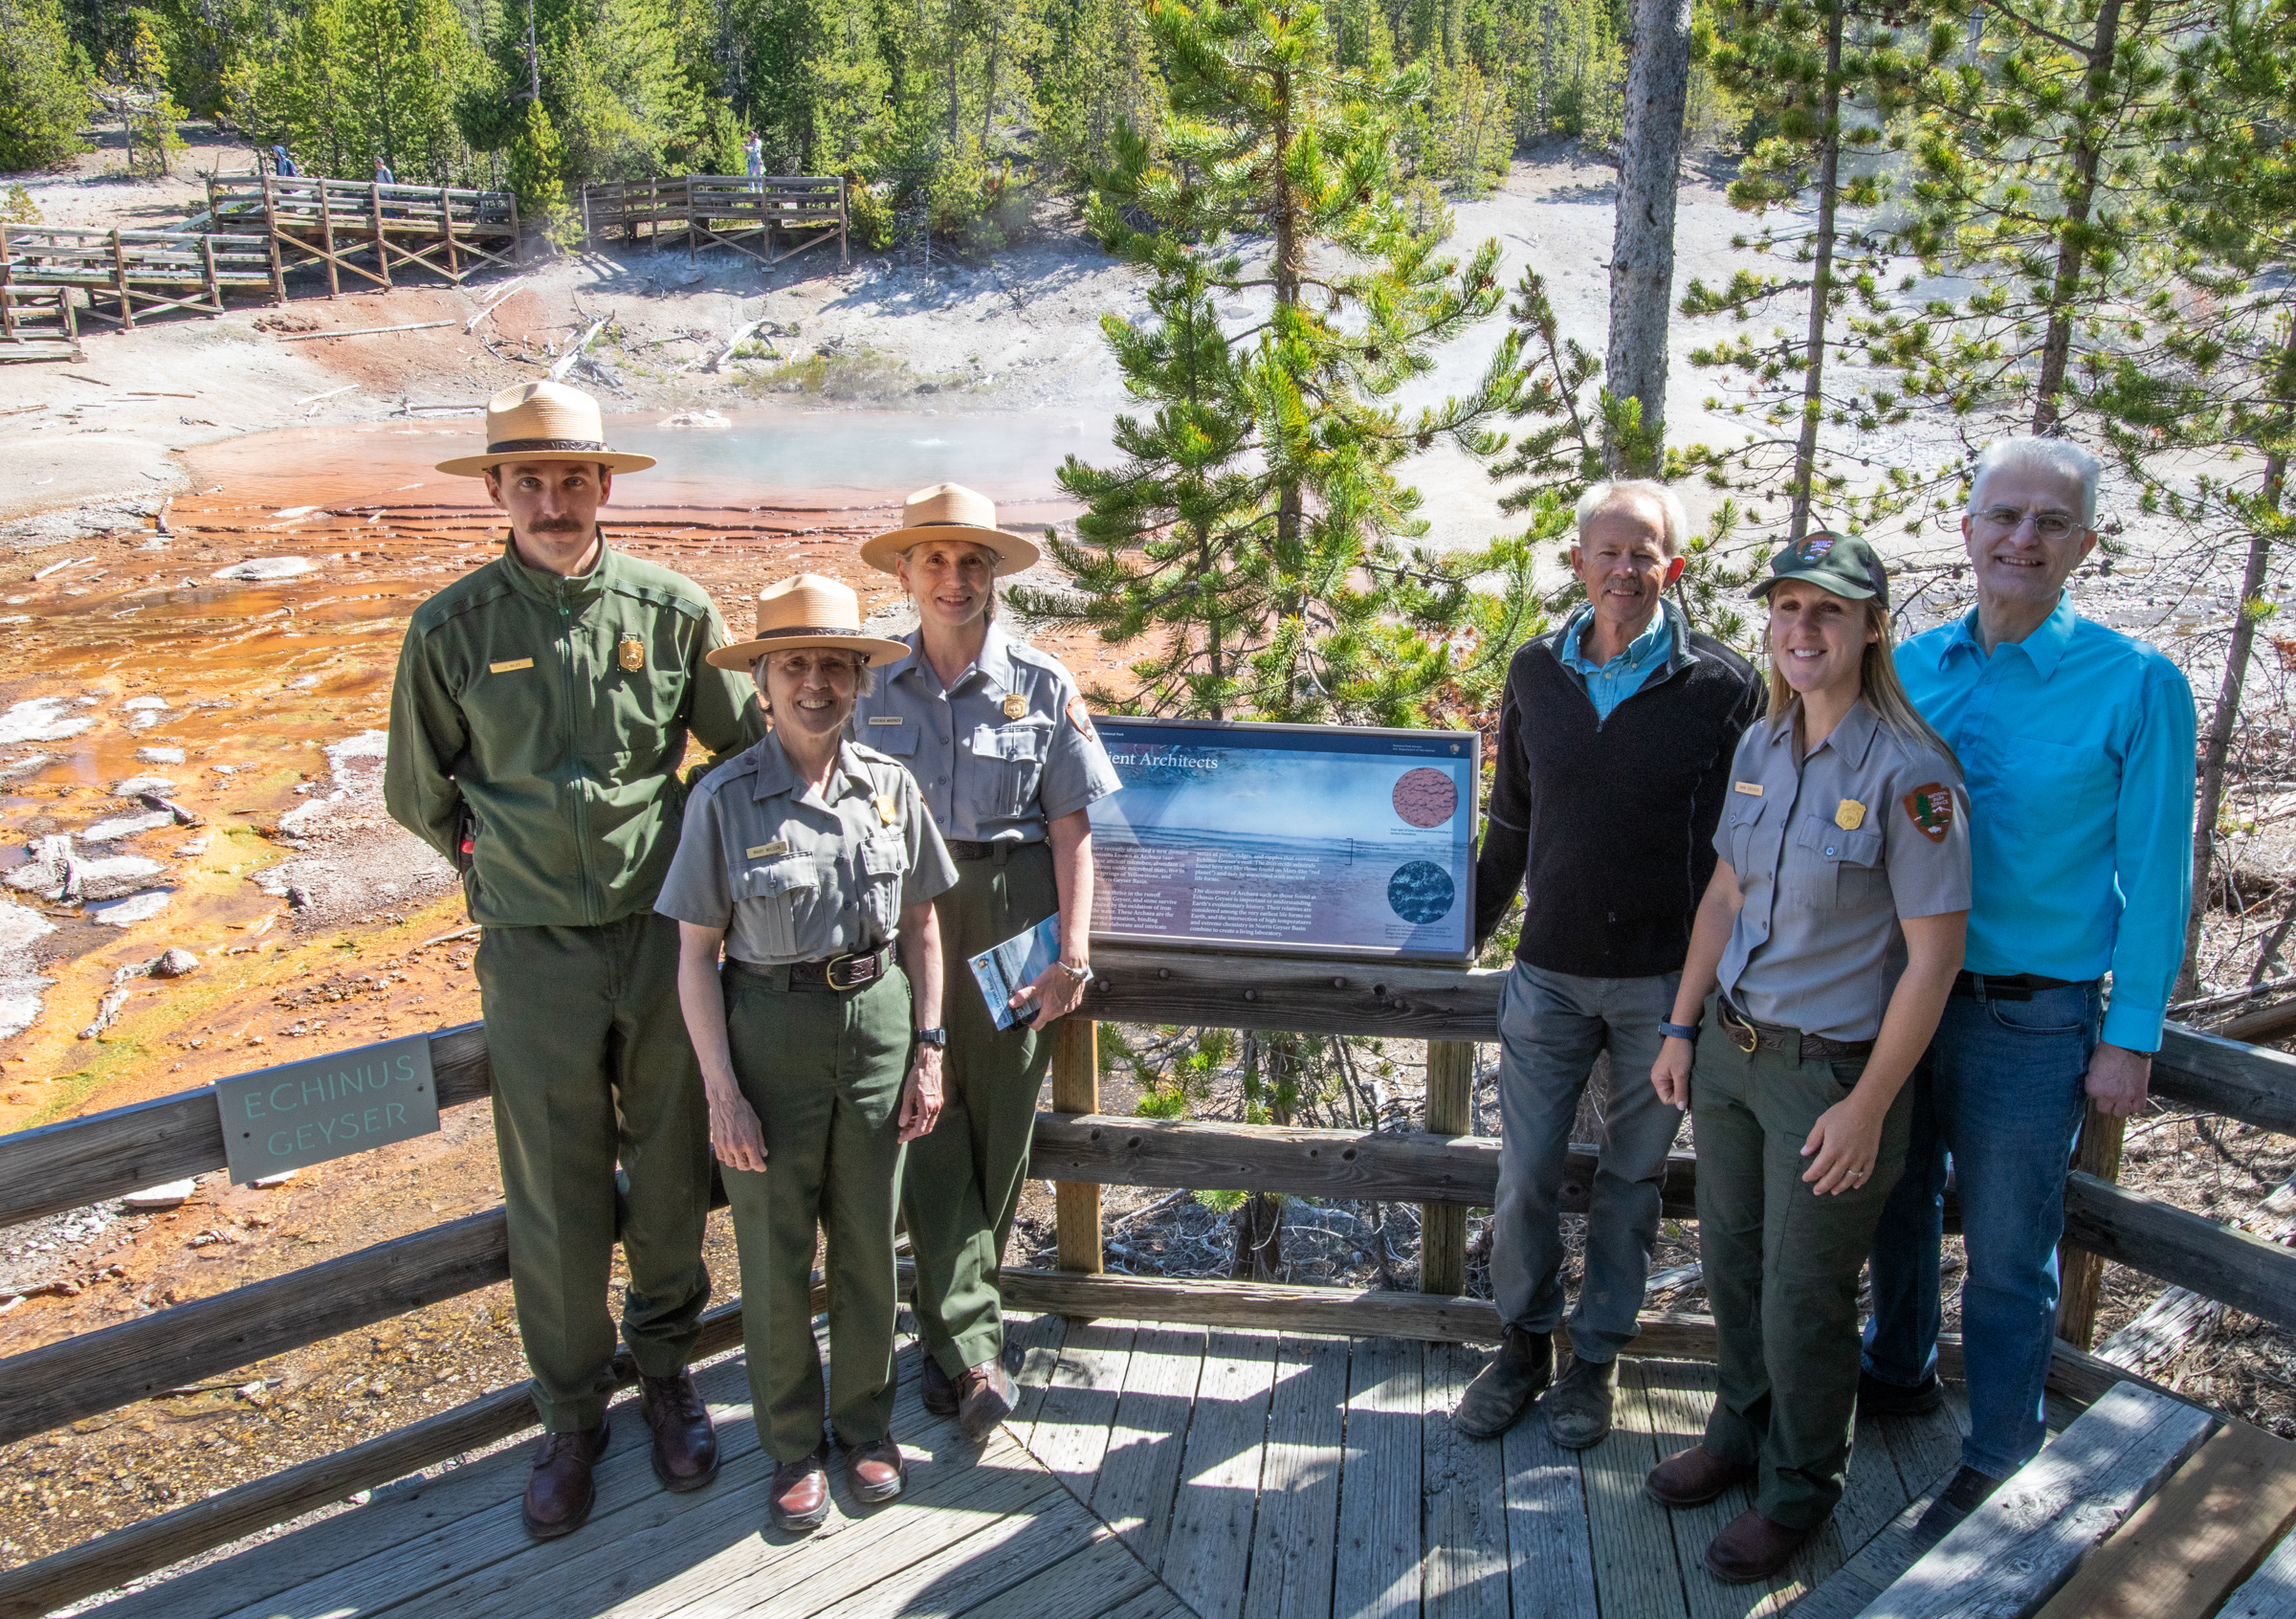 group of people at Yellowstone NP